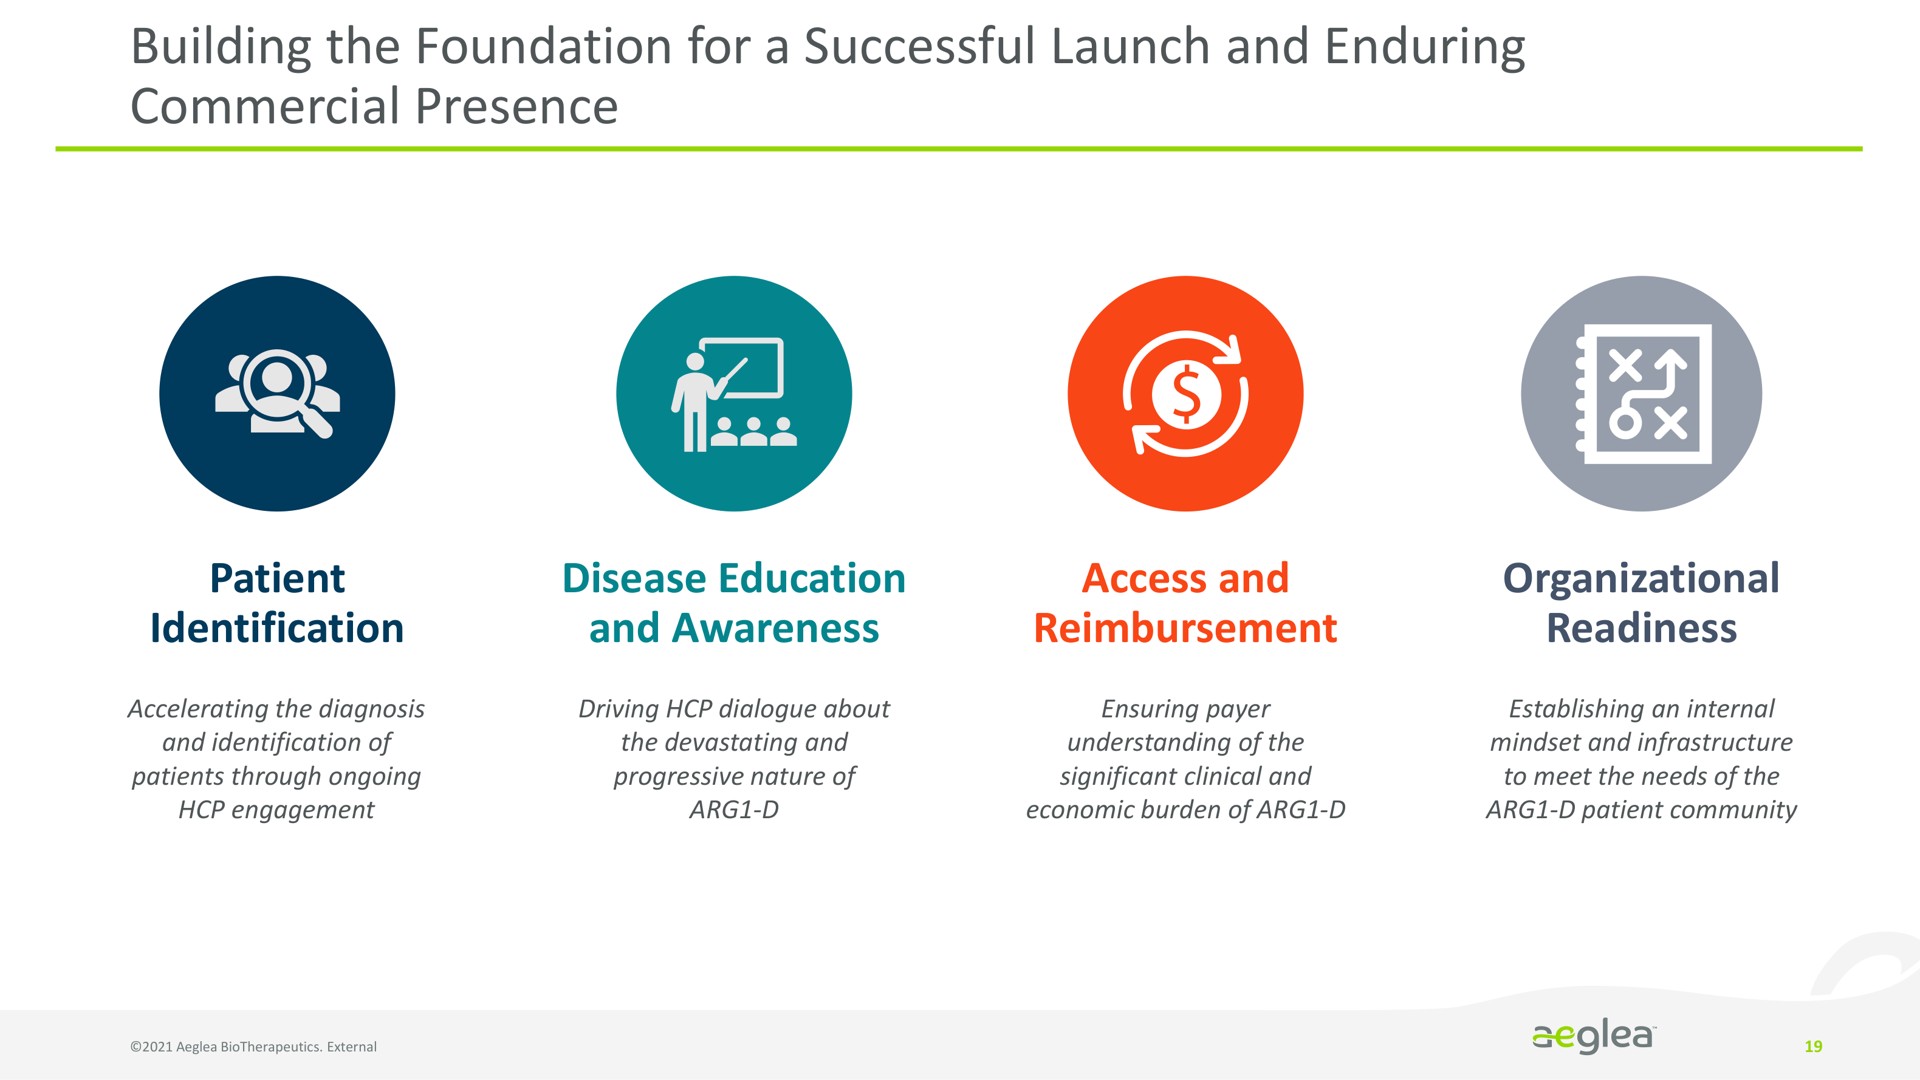 building the foundation for a successful launch and enduring commercial presence | Aeglea BioTherapeutics